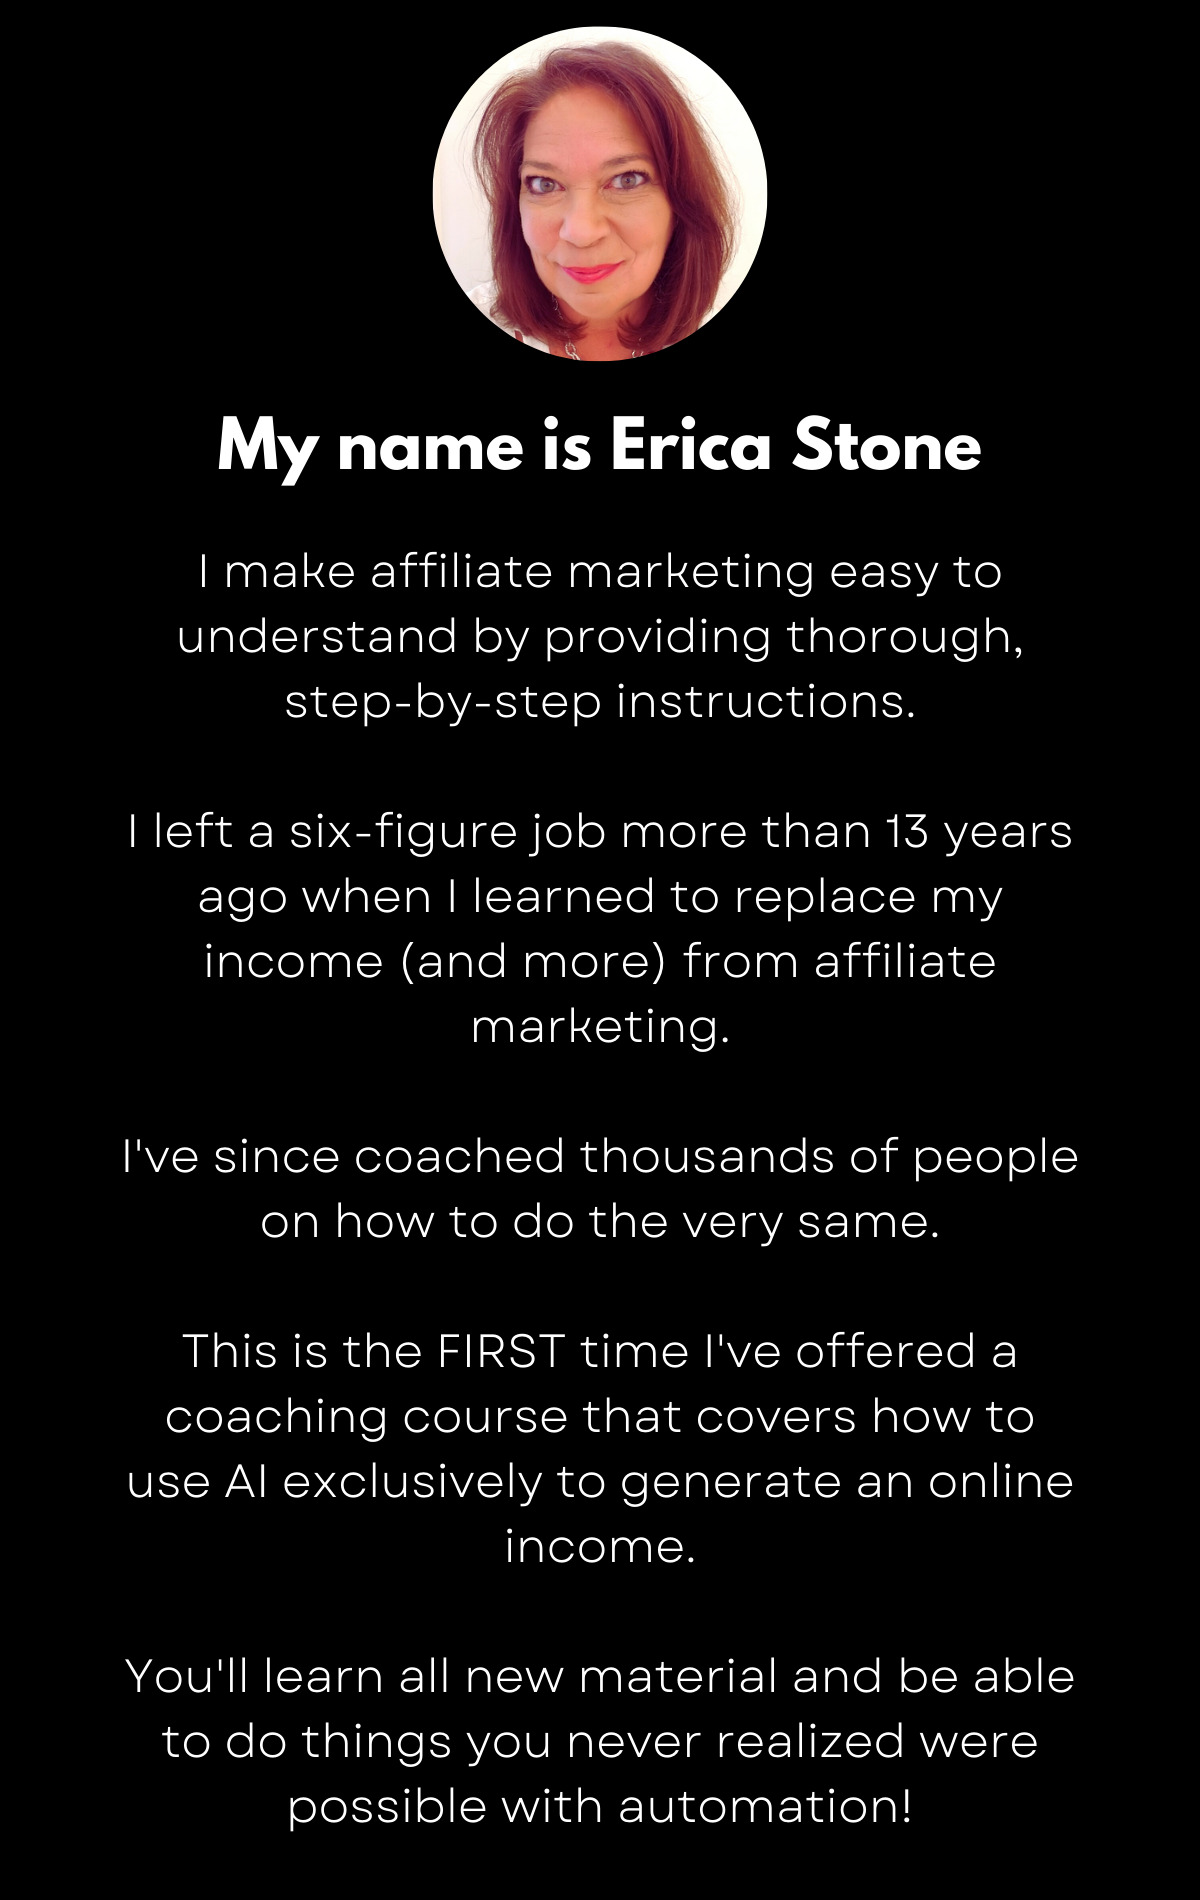 erica stone overview